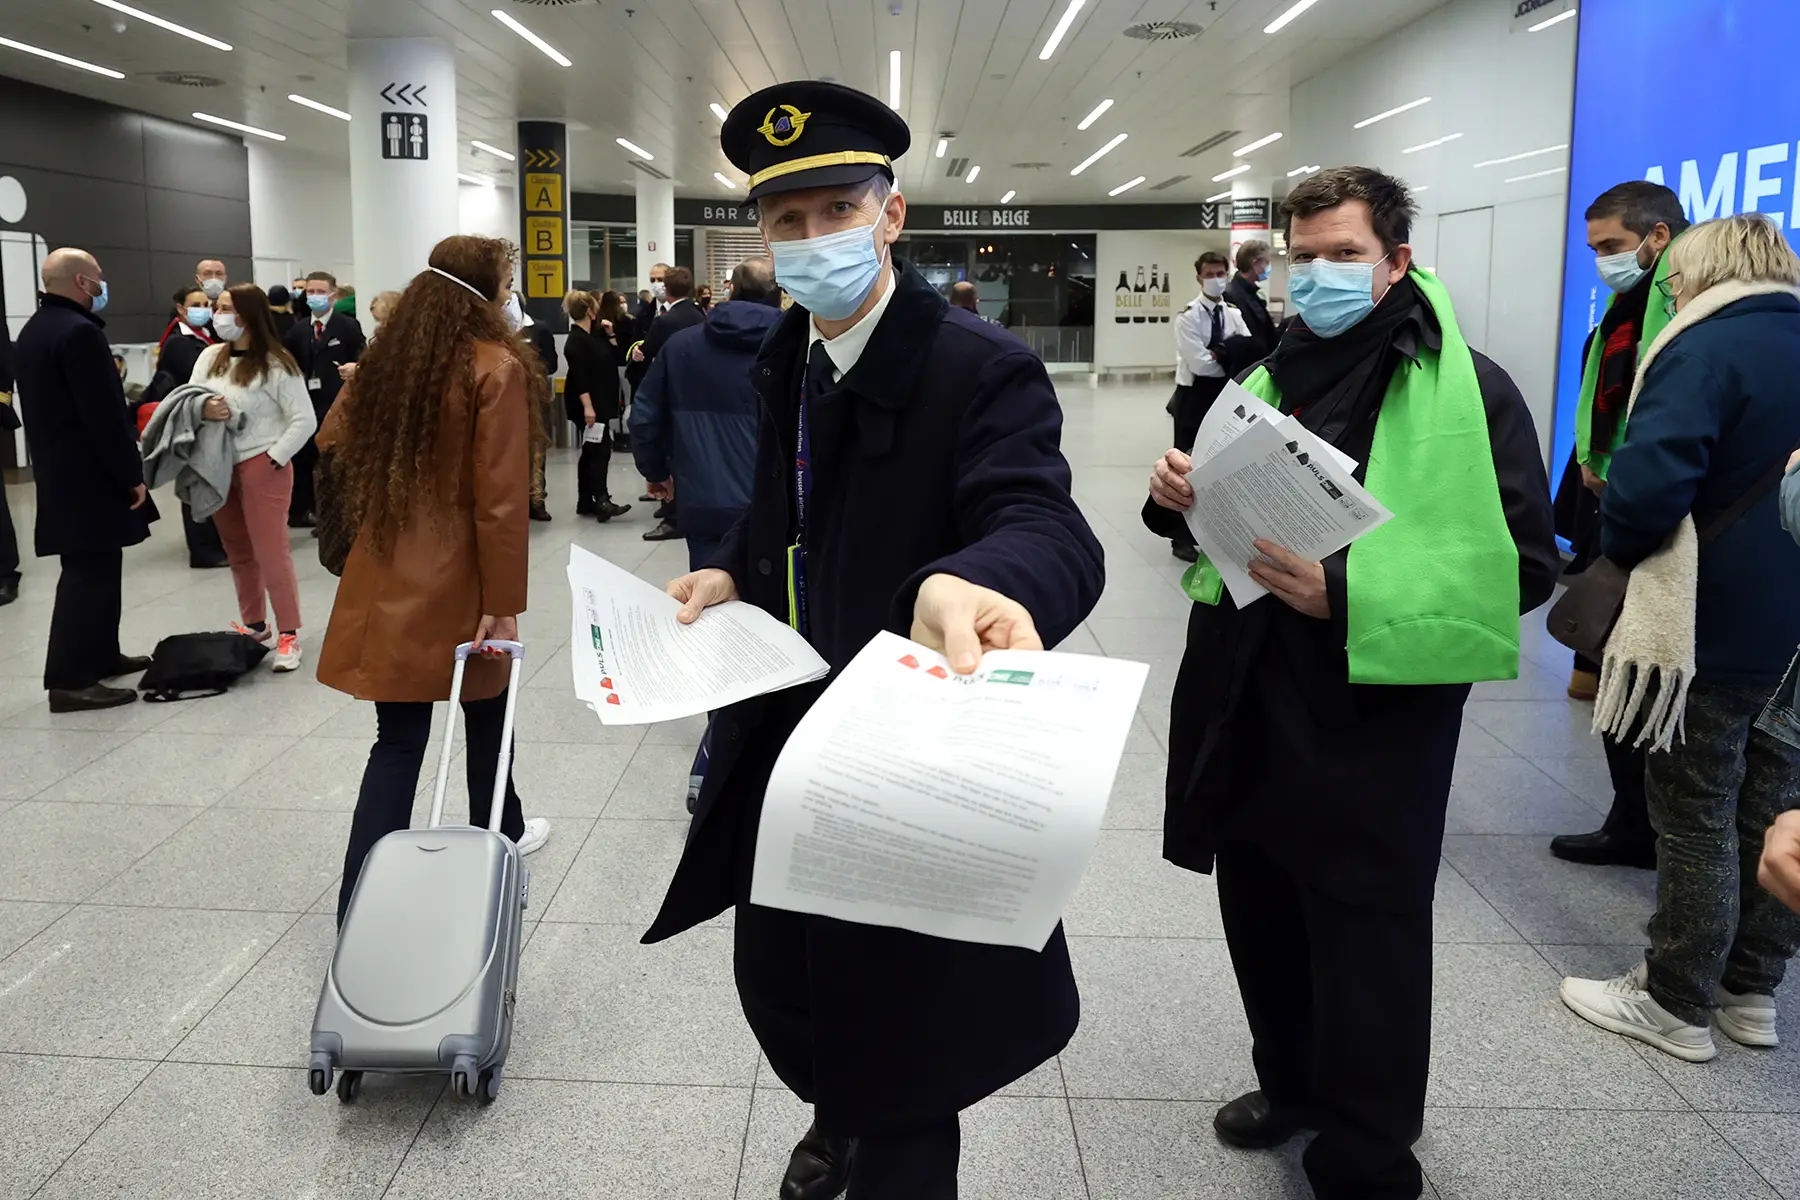 A man in a long jacket, surgical mask, and pilot's cap offers a piece of paper to the photographer. Workers on strike.